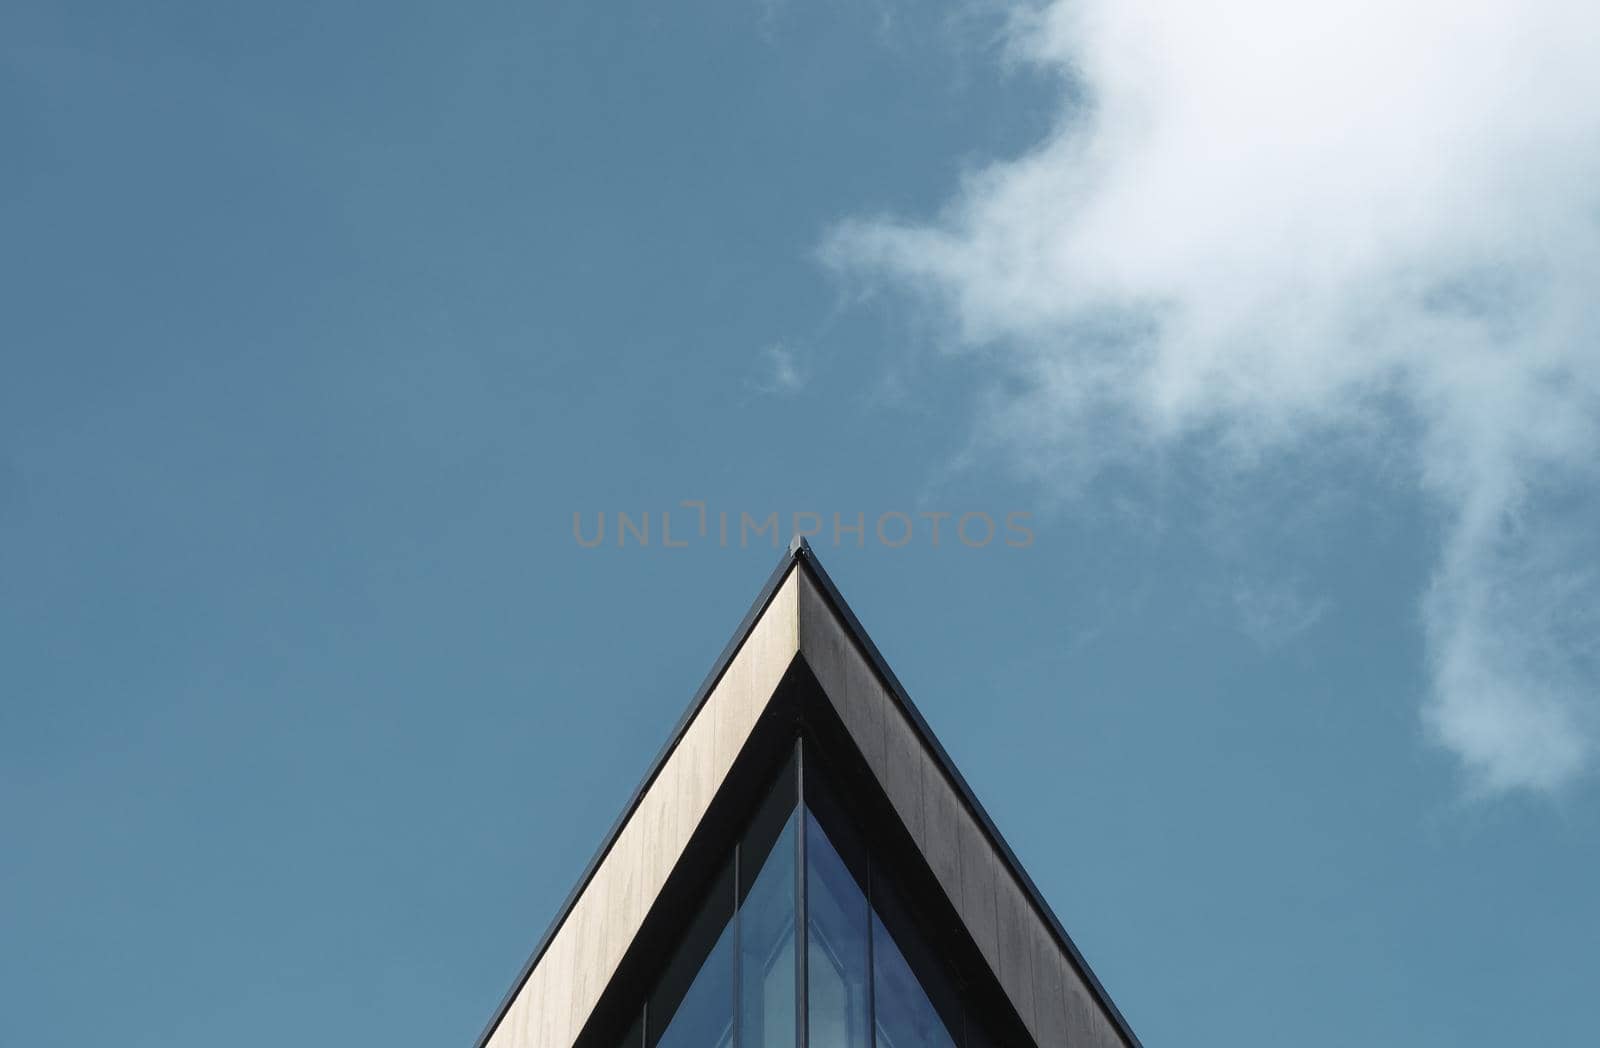 Abstract Triangular Building by mrdoomits